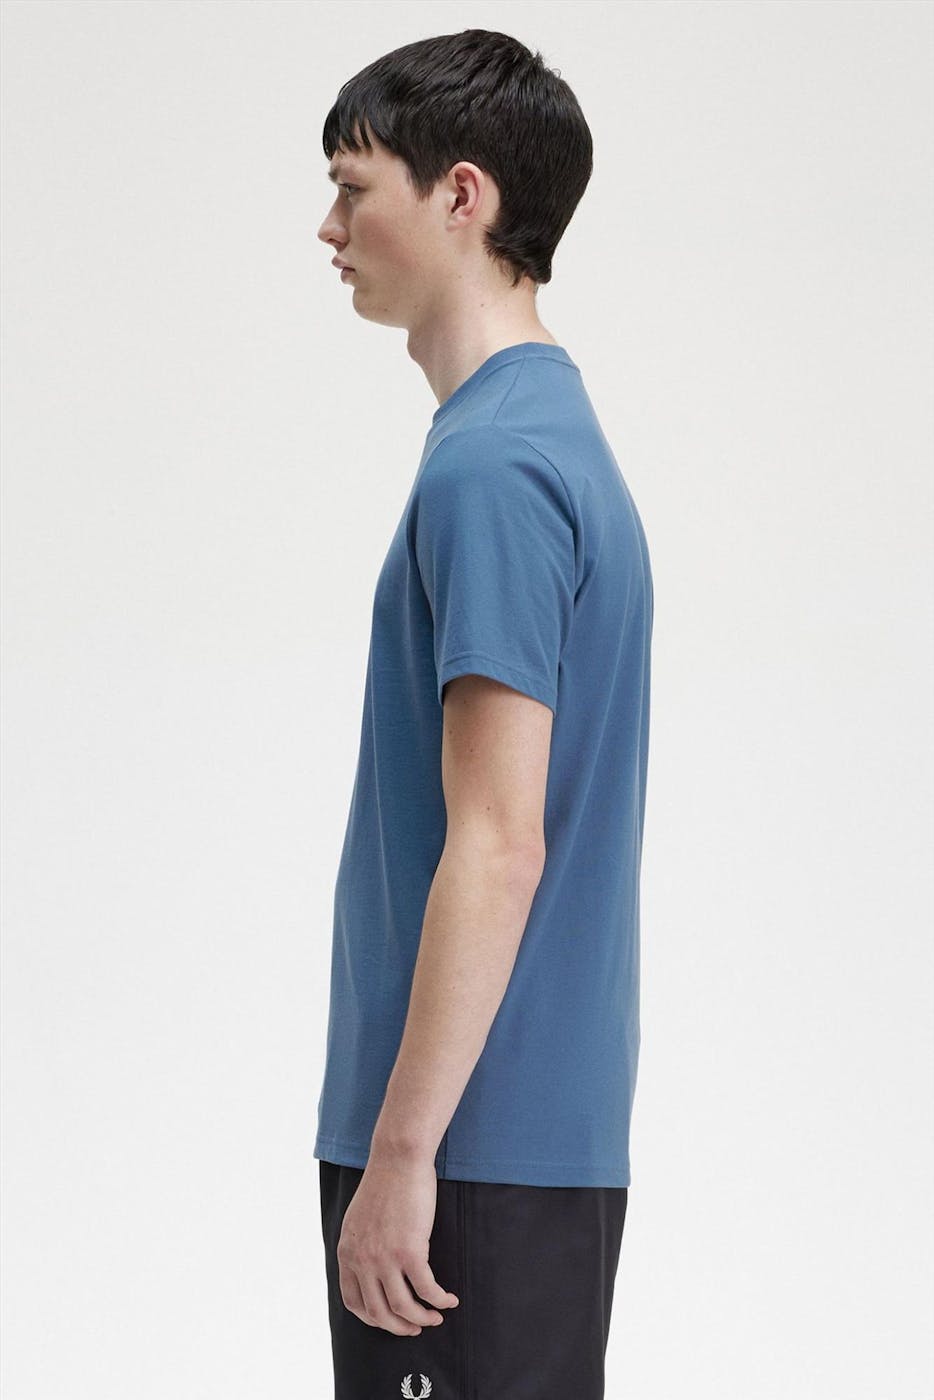 Fred Perry - Blauwe Embroidered T-shirt